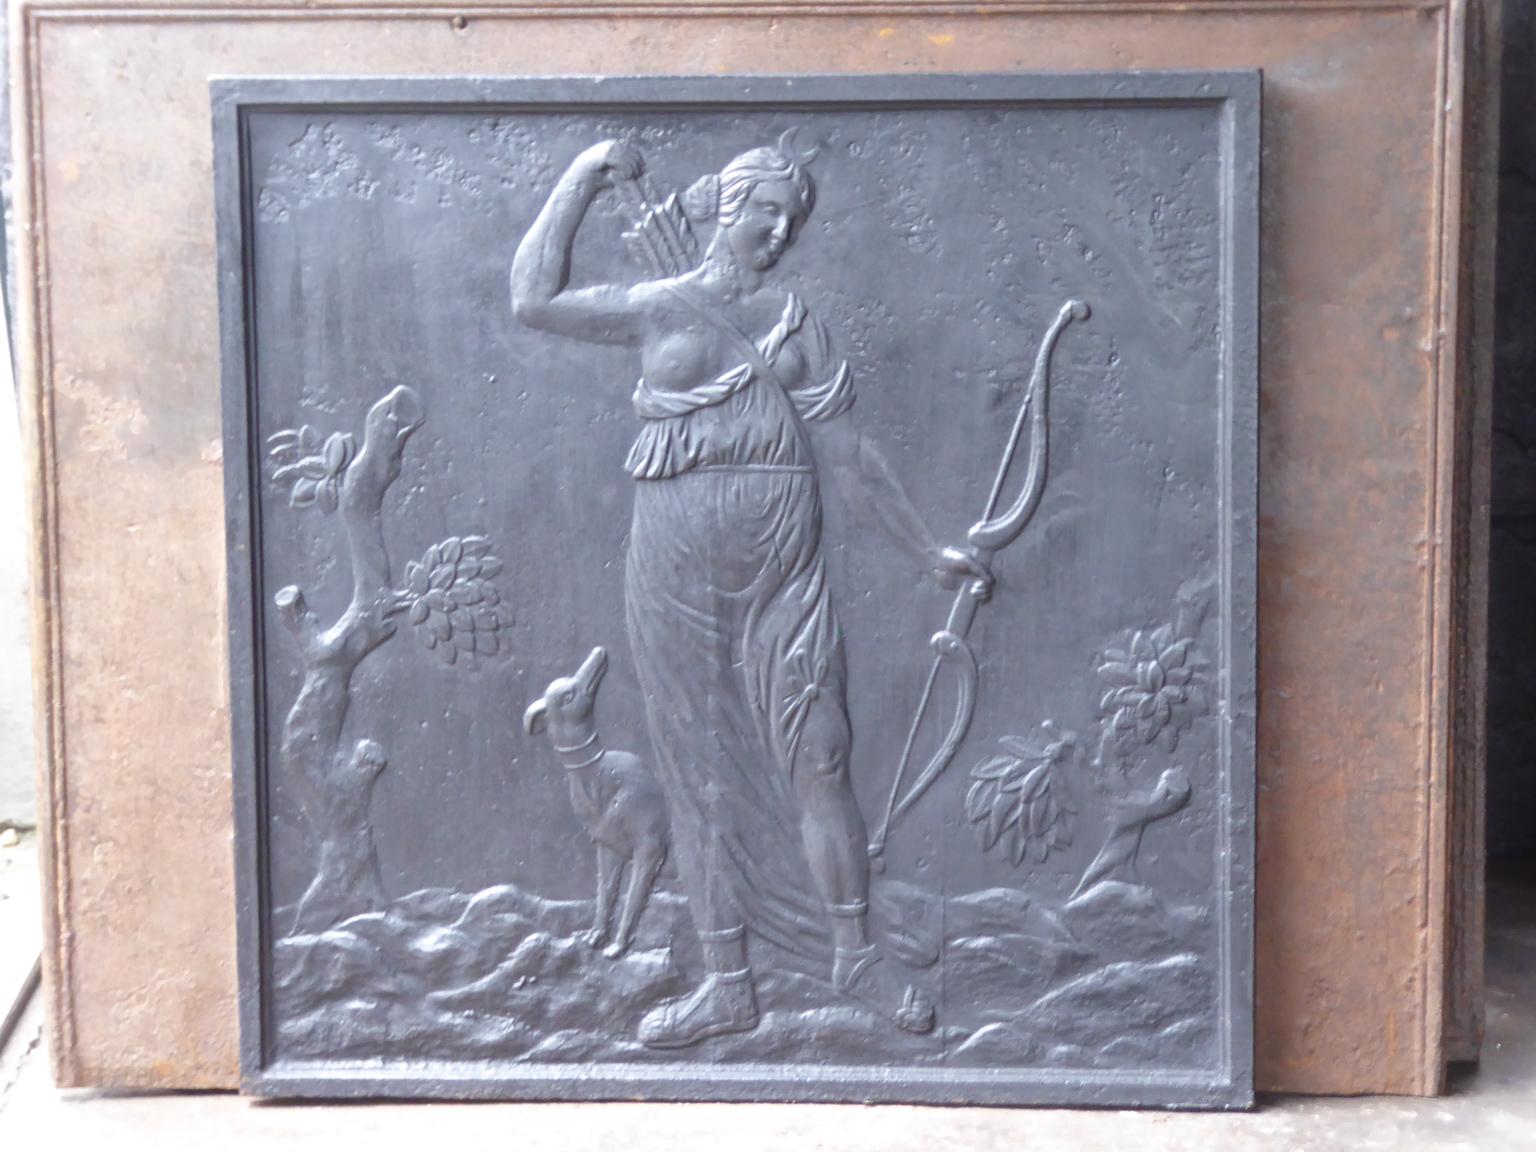 19th century French Napoleon III fireback with the goddess Diana. Goddess of hunting, also protector of animals of the forest, especially the young animals. She experienced great pleasure in hunting, but took care that she did not kill more animals